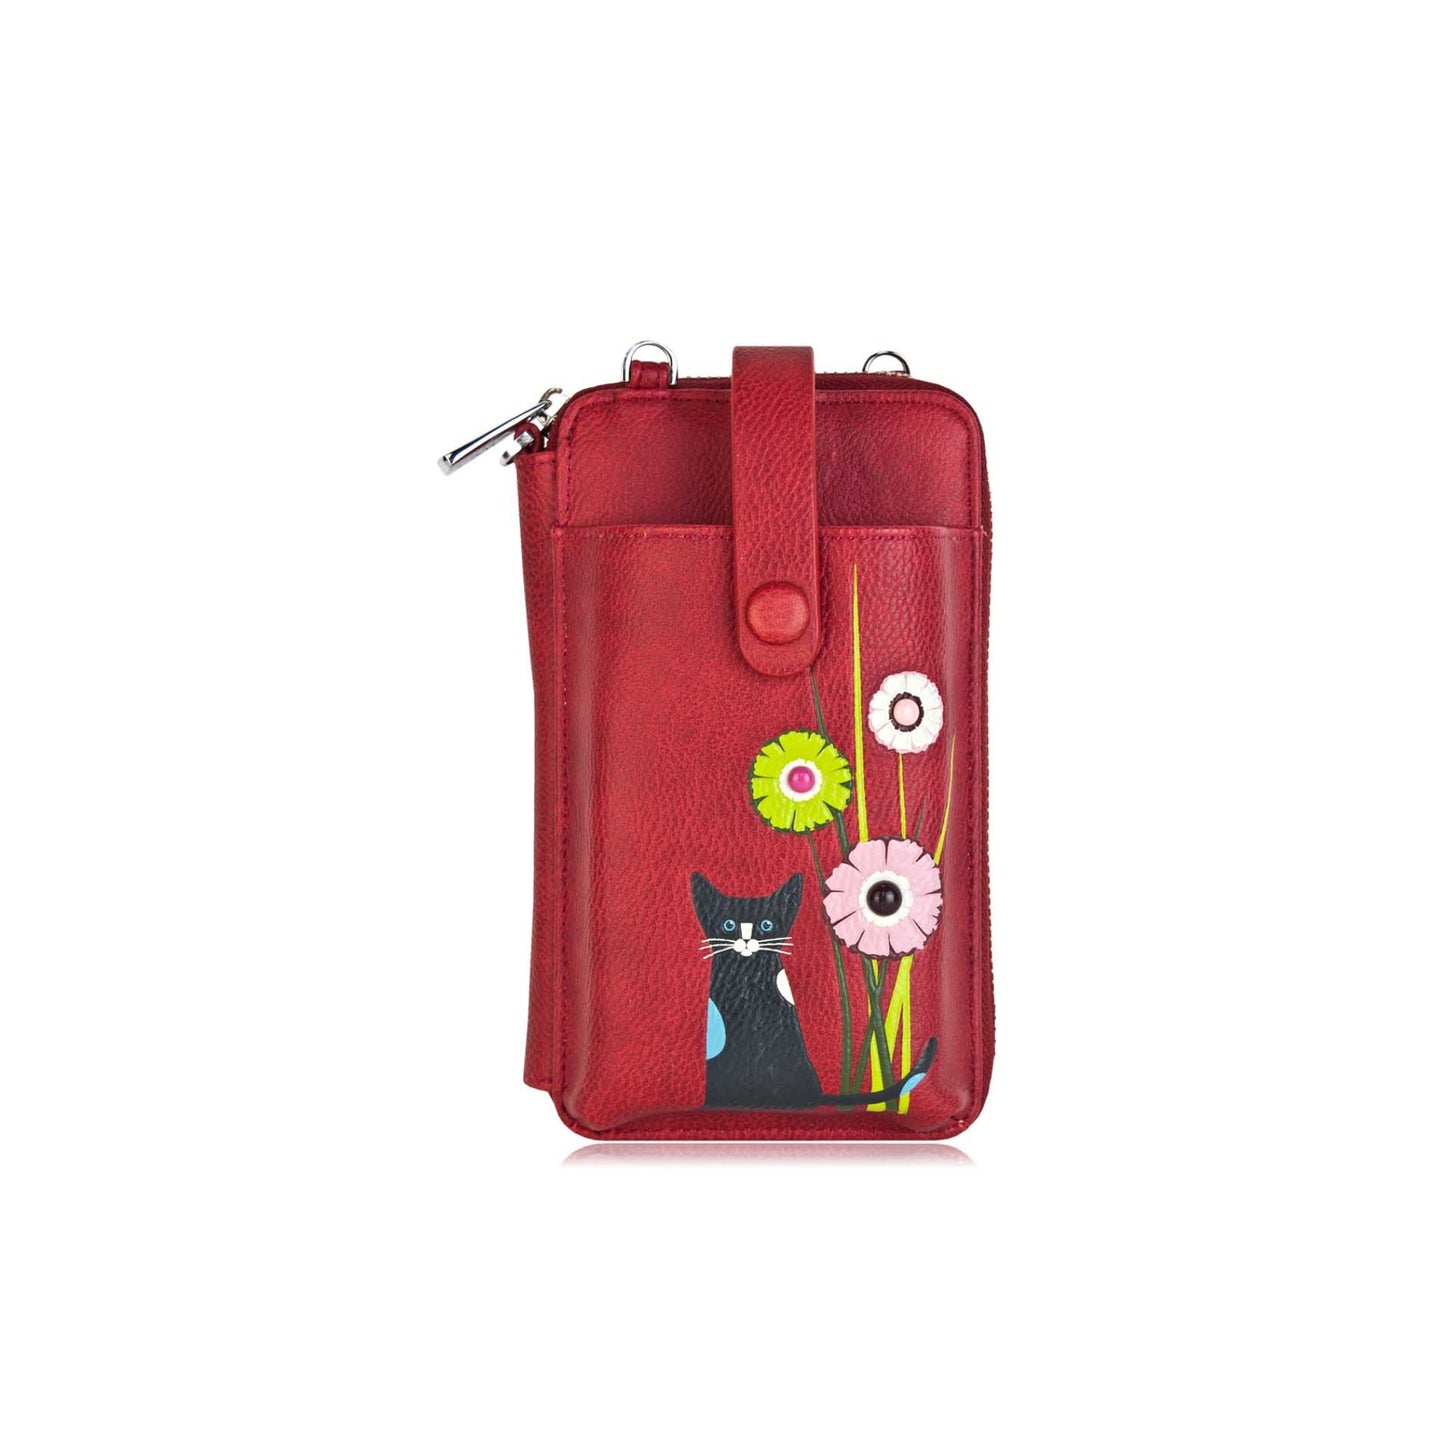 Leni Smartphone Pouch - Red